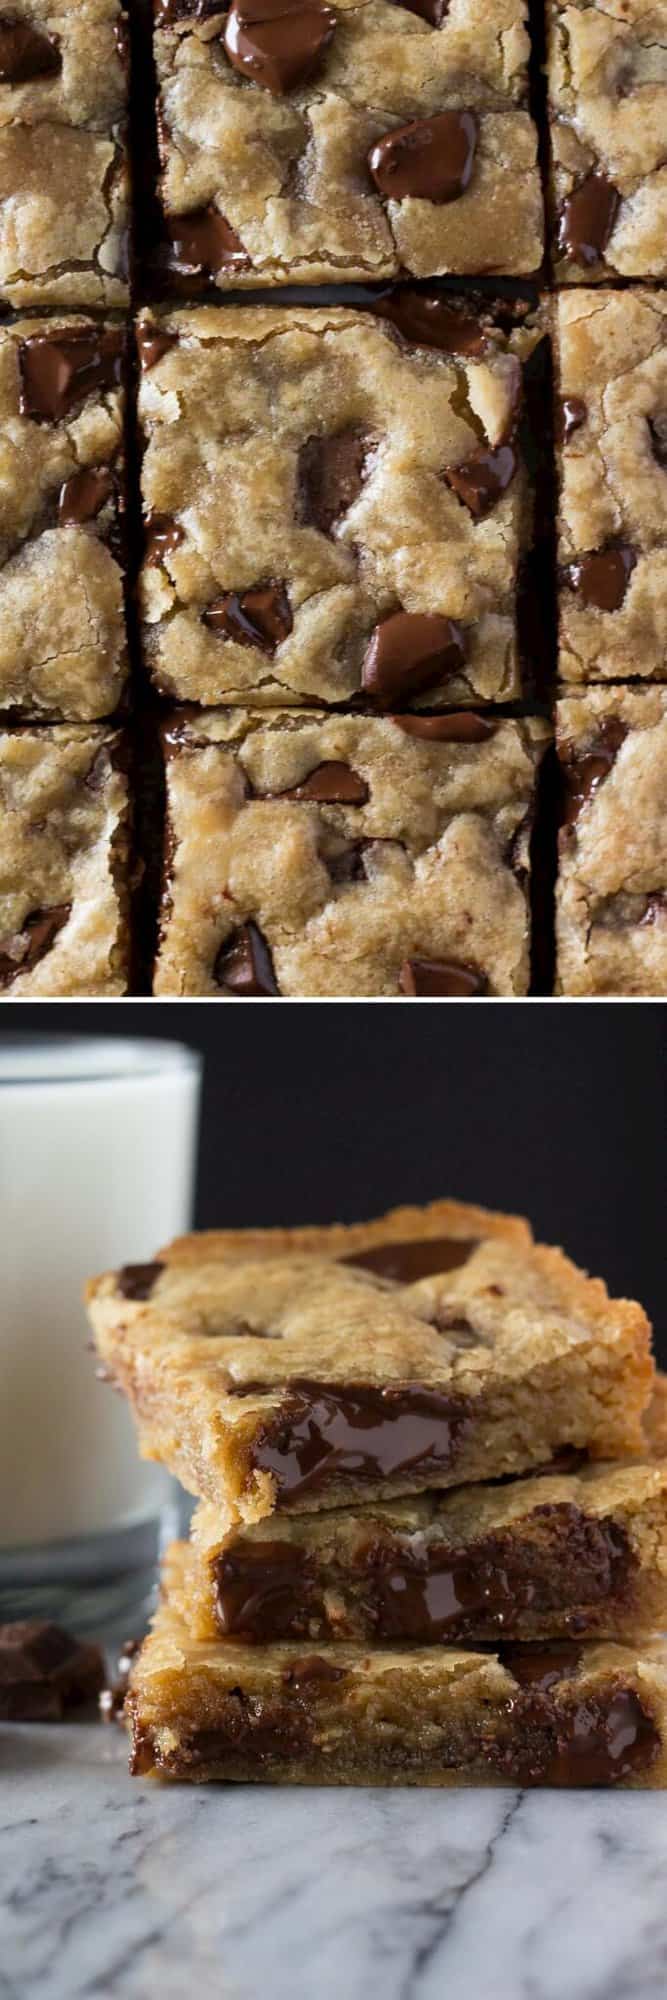 Brown butter & Dark Chocolate Chunks come together in these AMAZING blondies. No mixer, one bowl & ridiculously delicious!